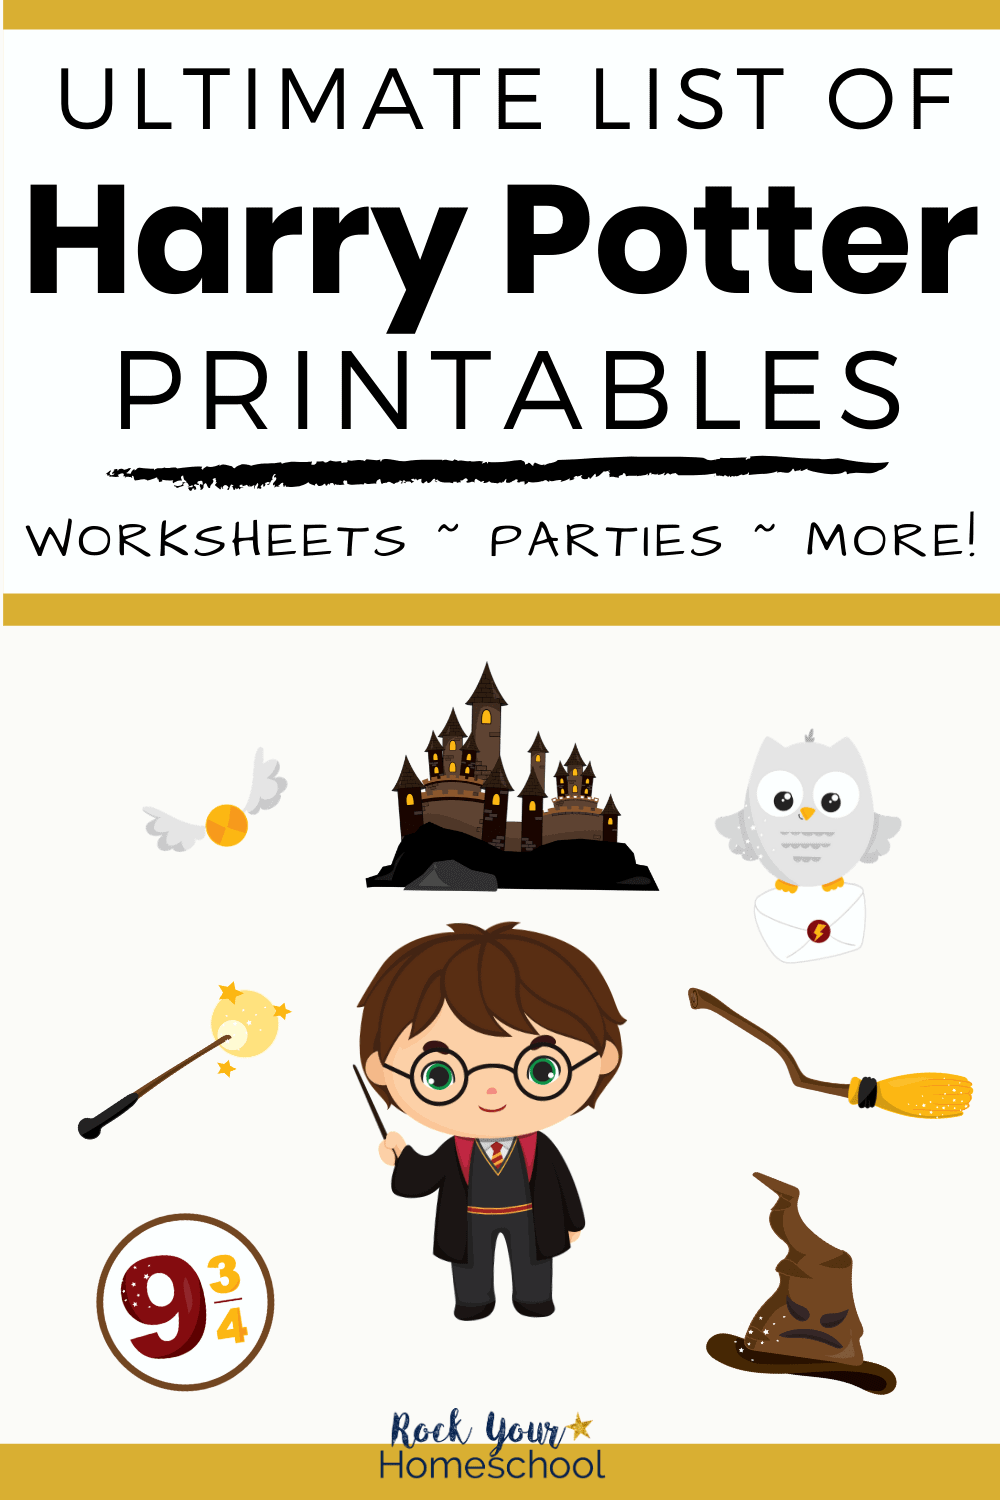 Harry Potter Inspired Printables (Free): Mega List for Magical Fun